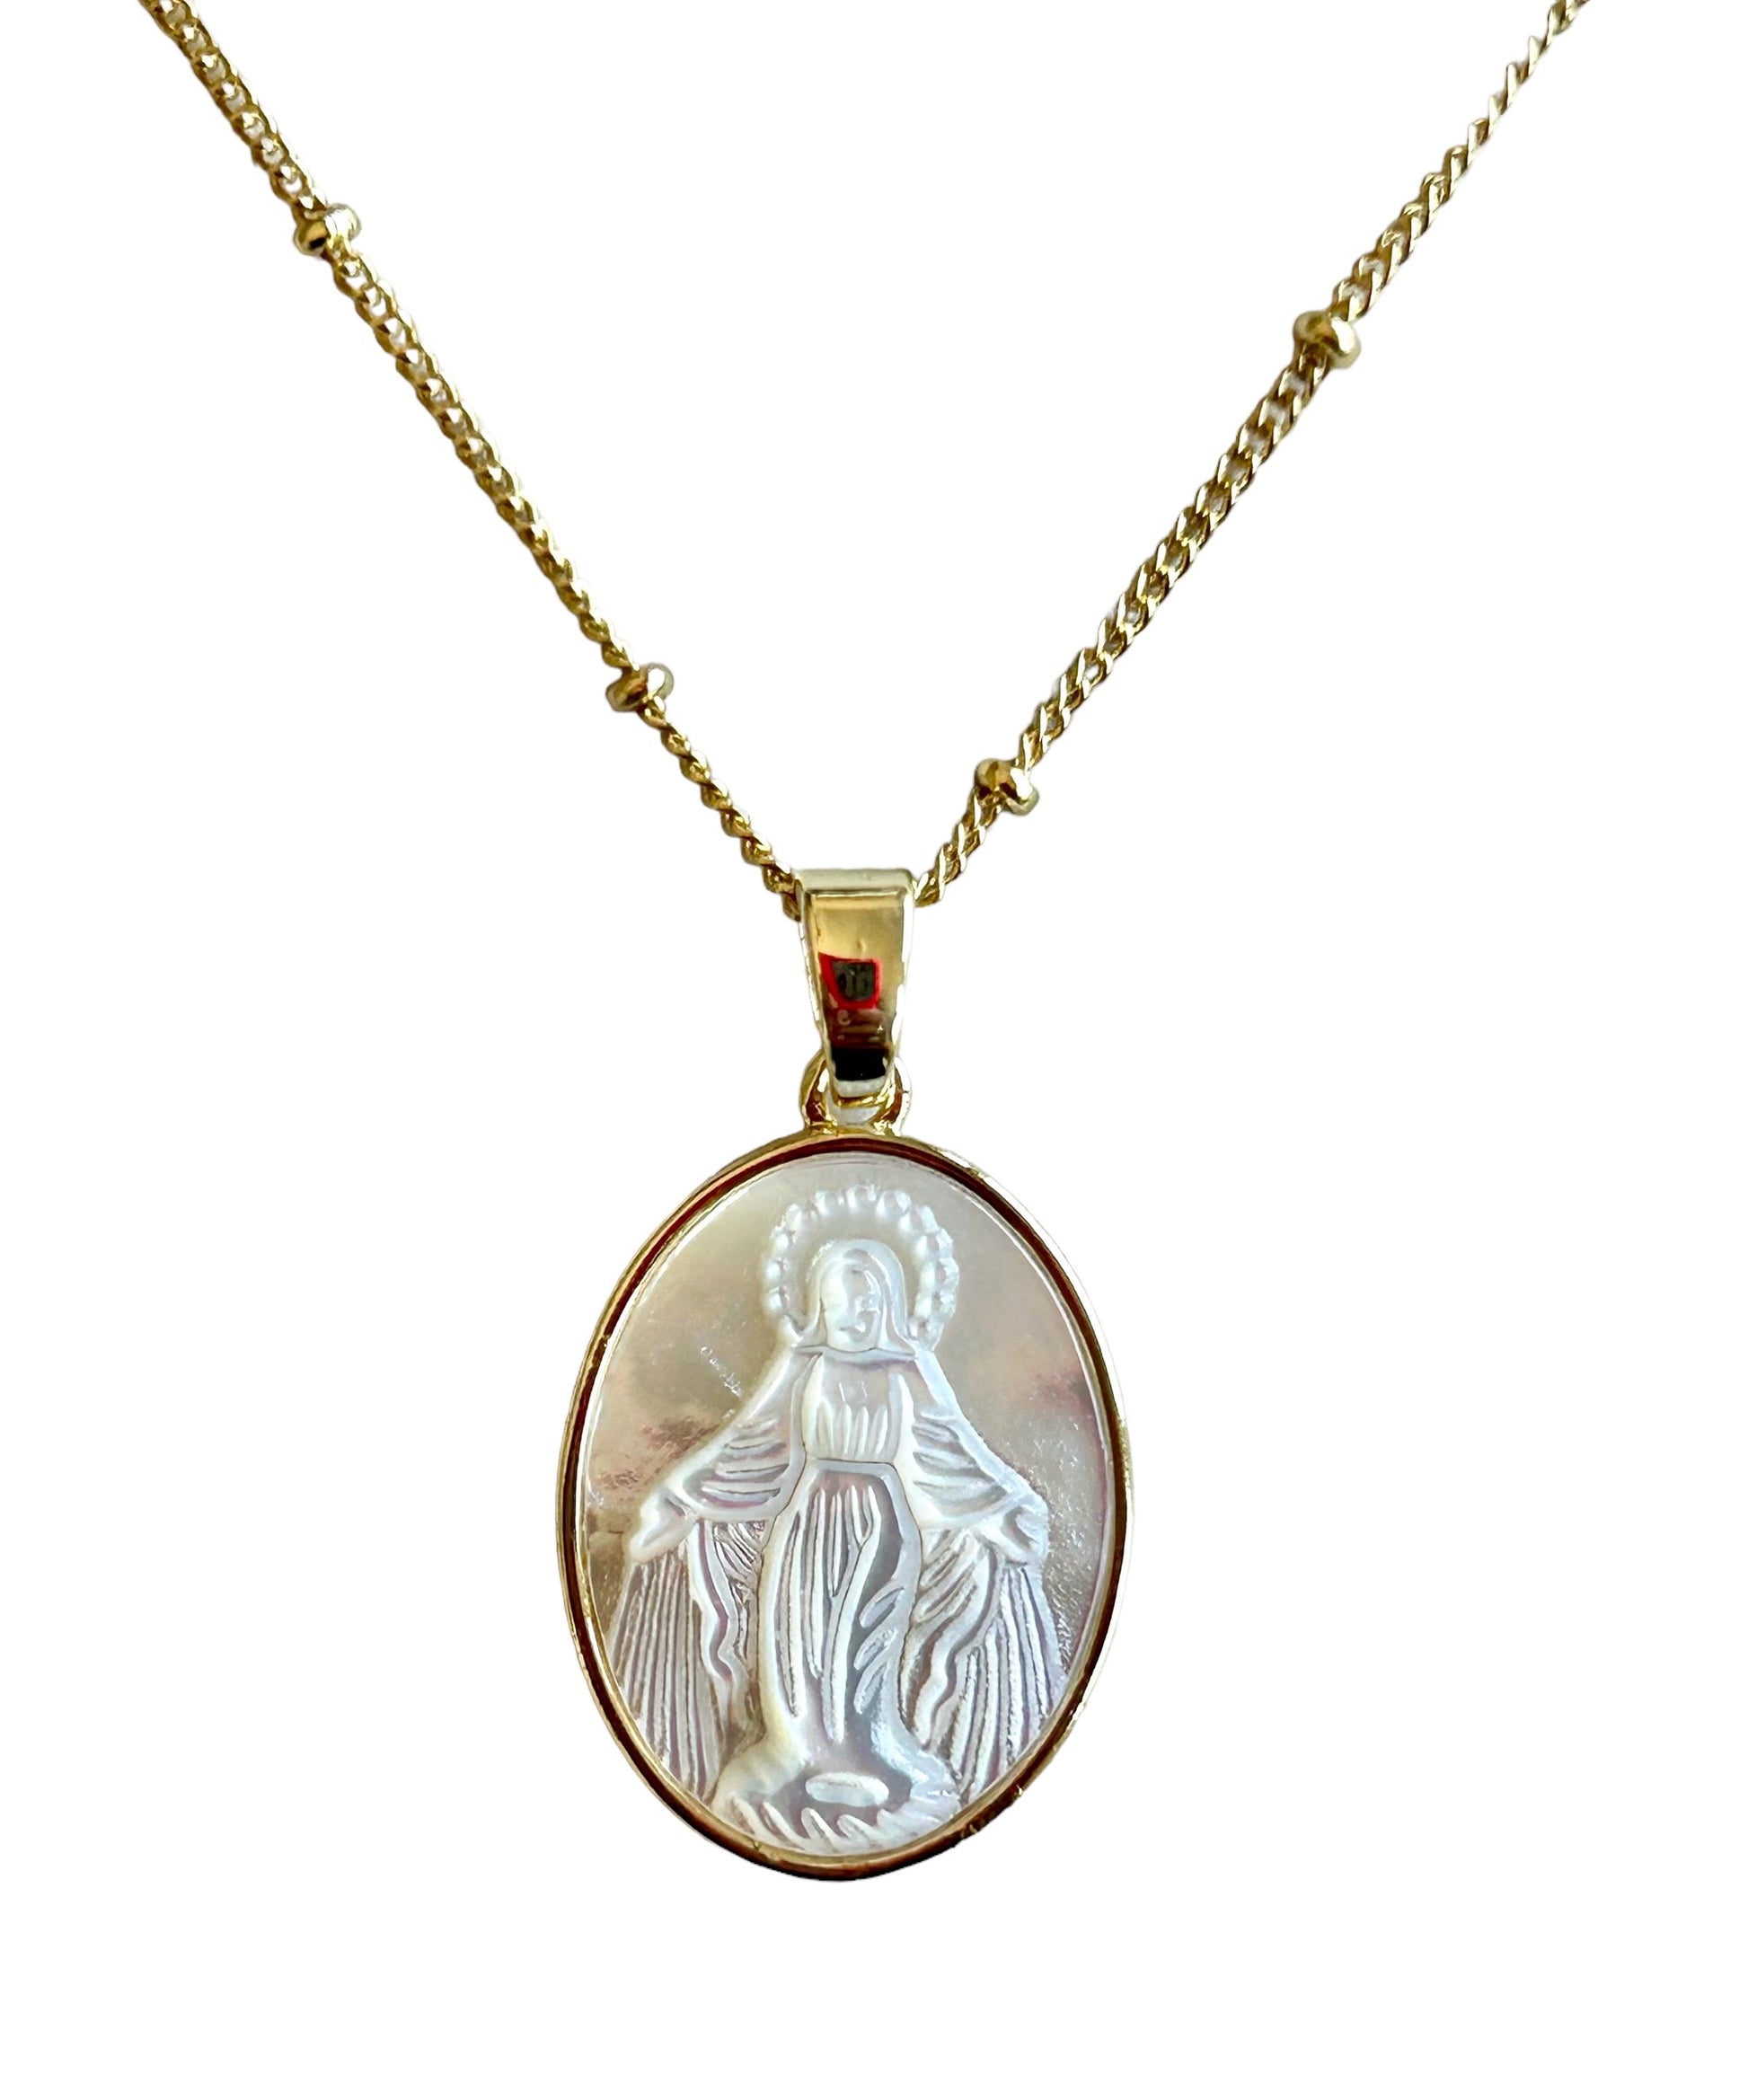 Virgin Mary Pendant Necklace with mother of pearl background and  oval shape Virgin Mary Pendant necklace, catholic jewelry, catholic necklace, catholic gifts, catholic gift